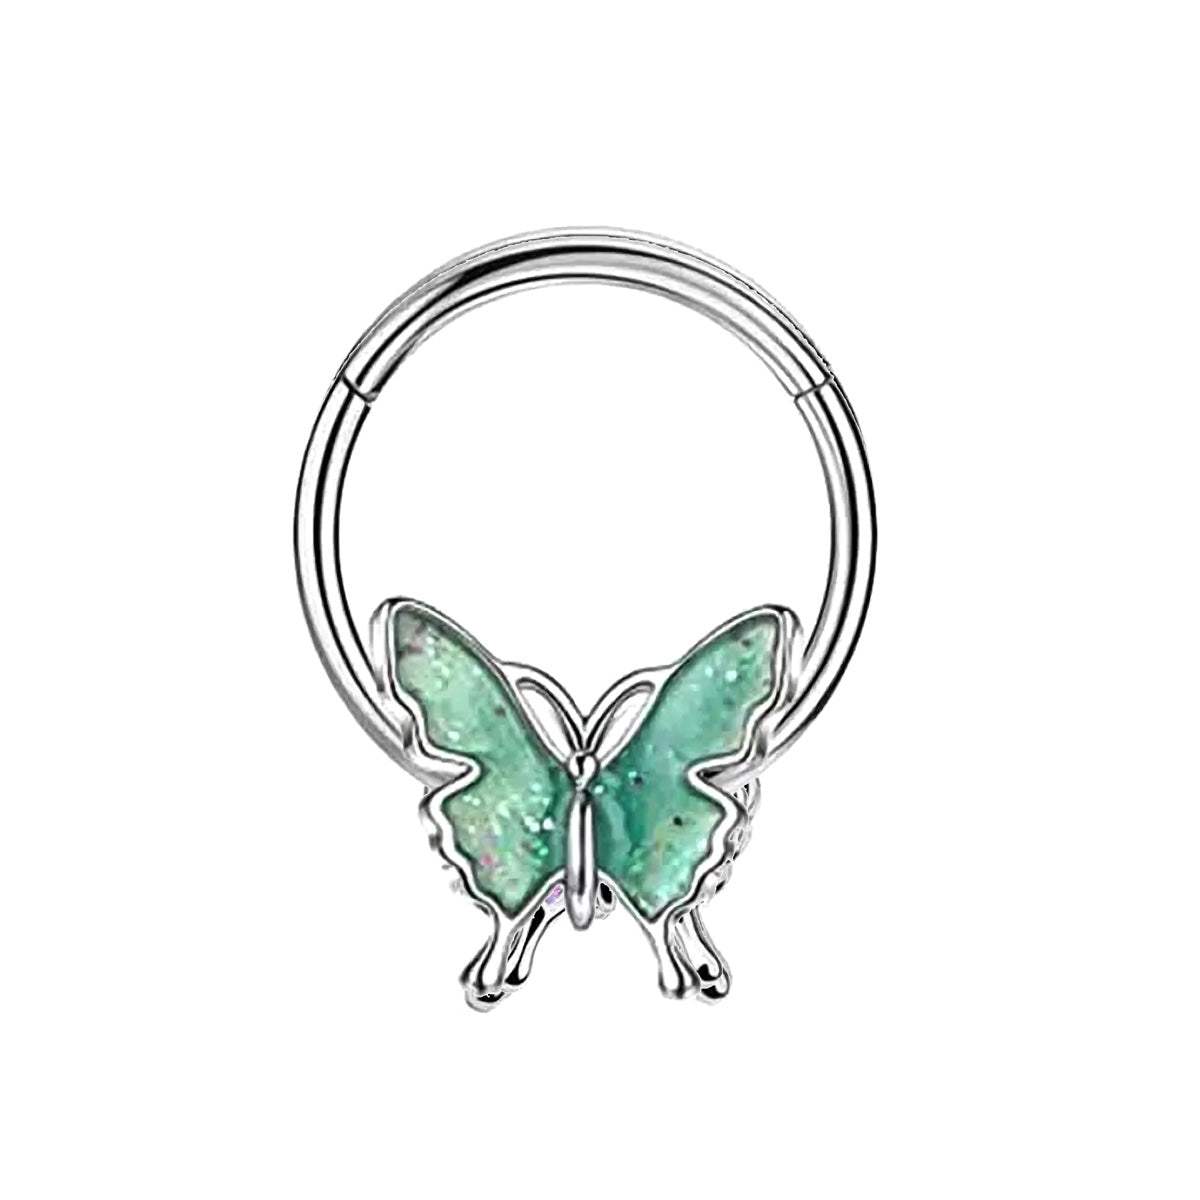 Hinged segment ring clicker butterfly 1.2mm (Steel 316L)